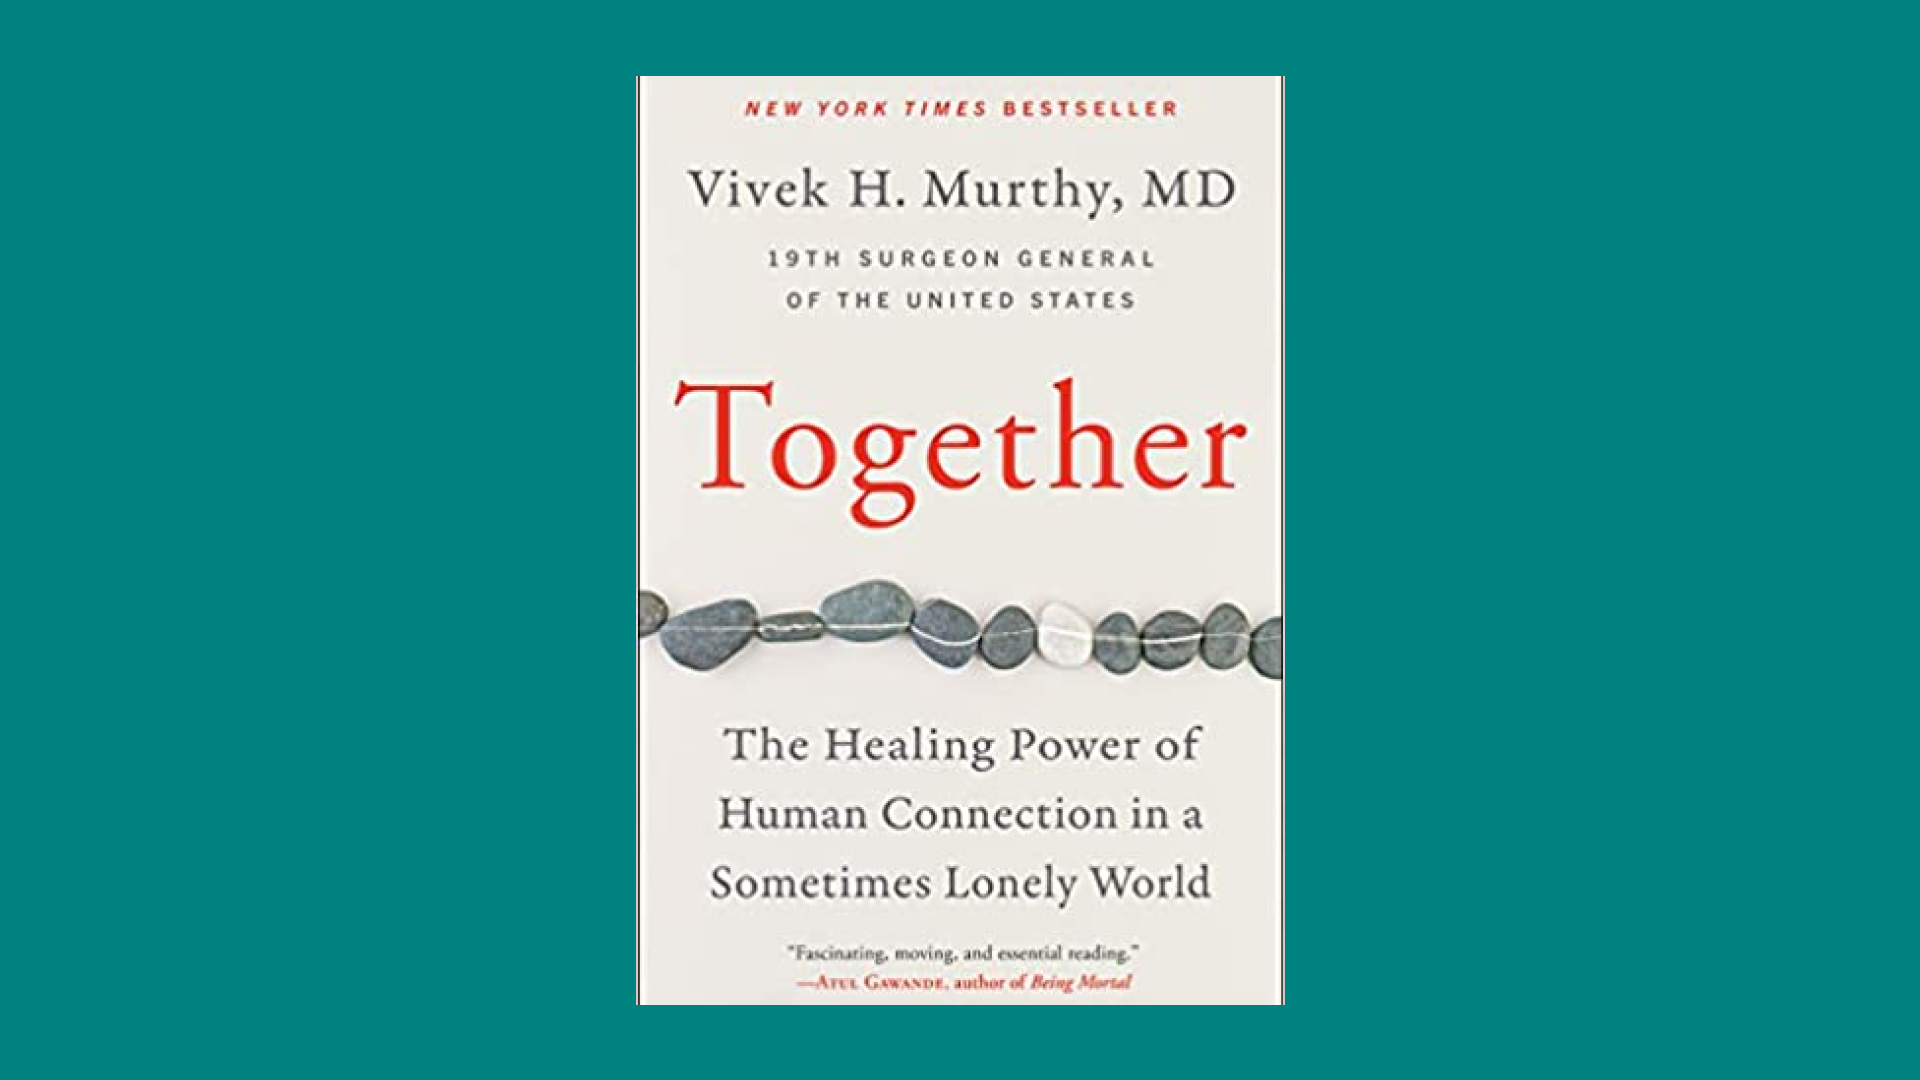 "Together: The Healing Power of Human Connection in a Sometimes Lonely World" by Vivek H. Murthy M.D.